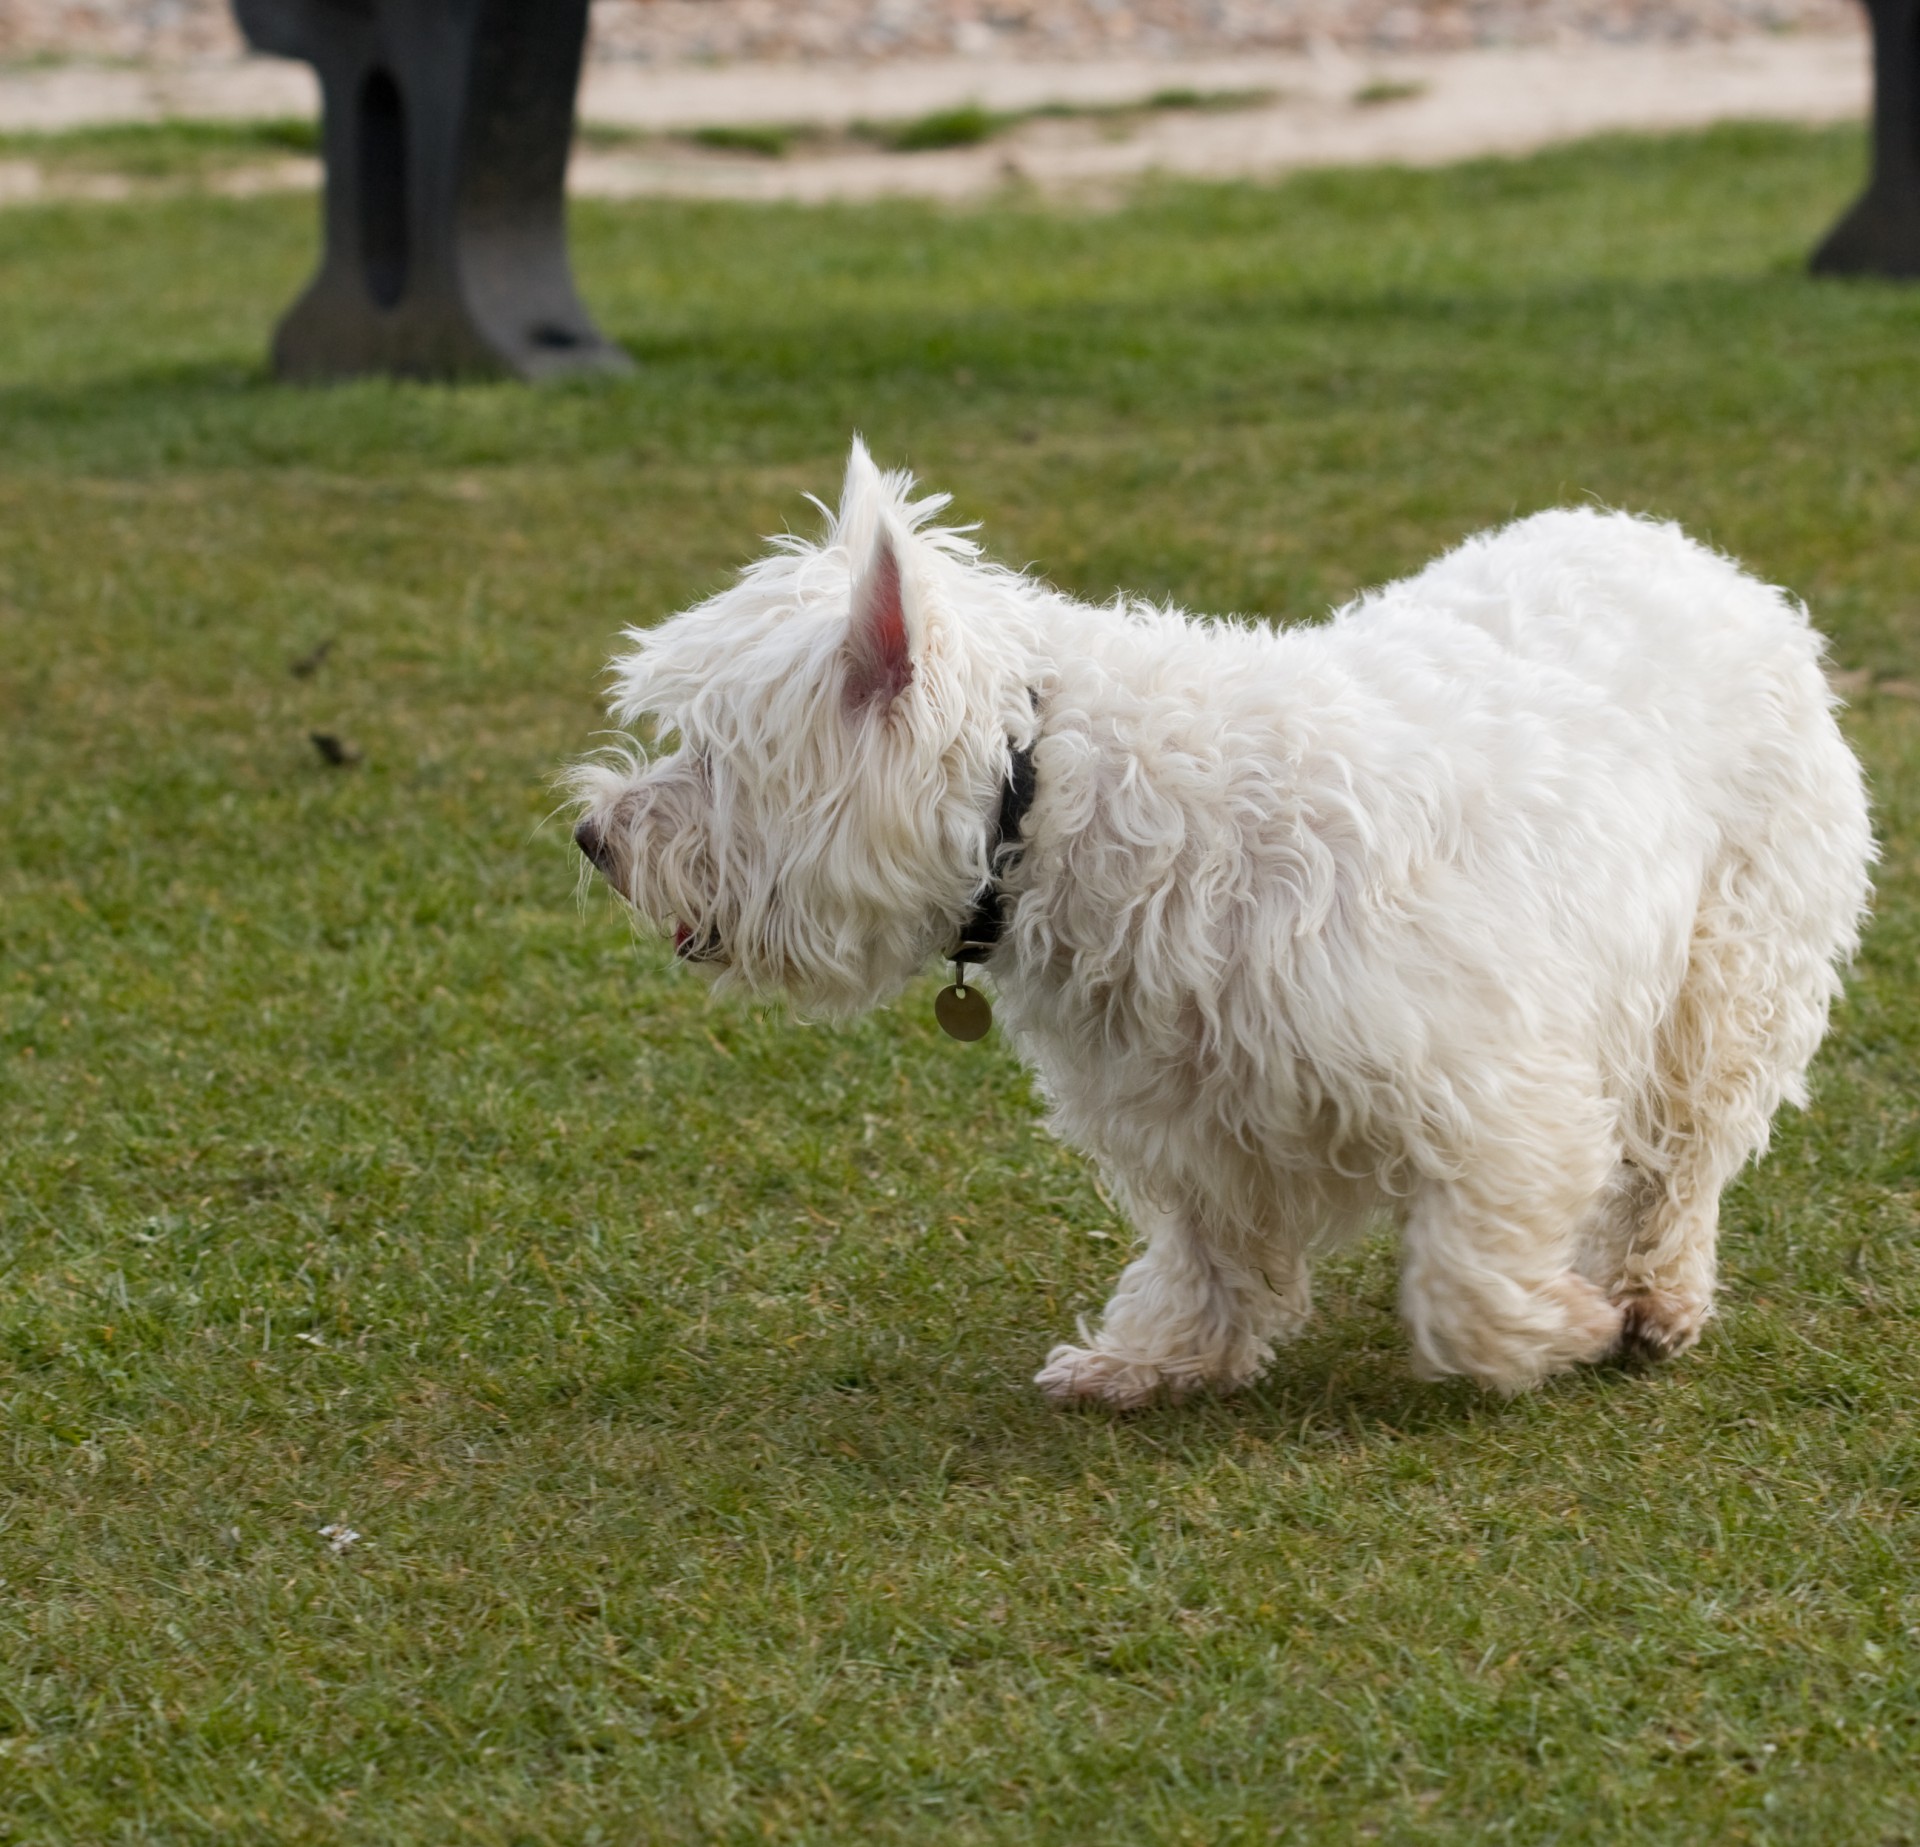 Cute little white westie dog on the grass